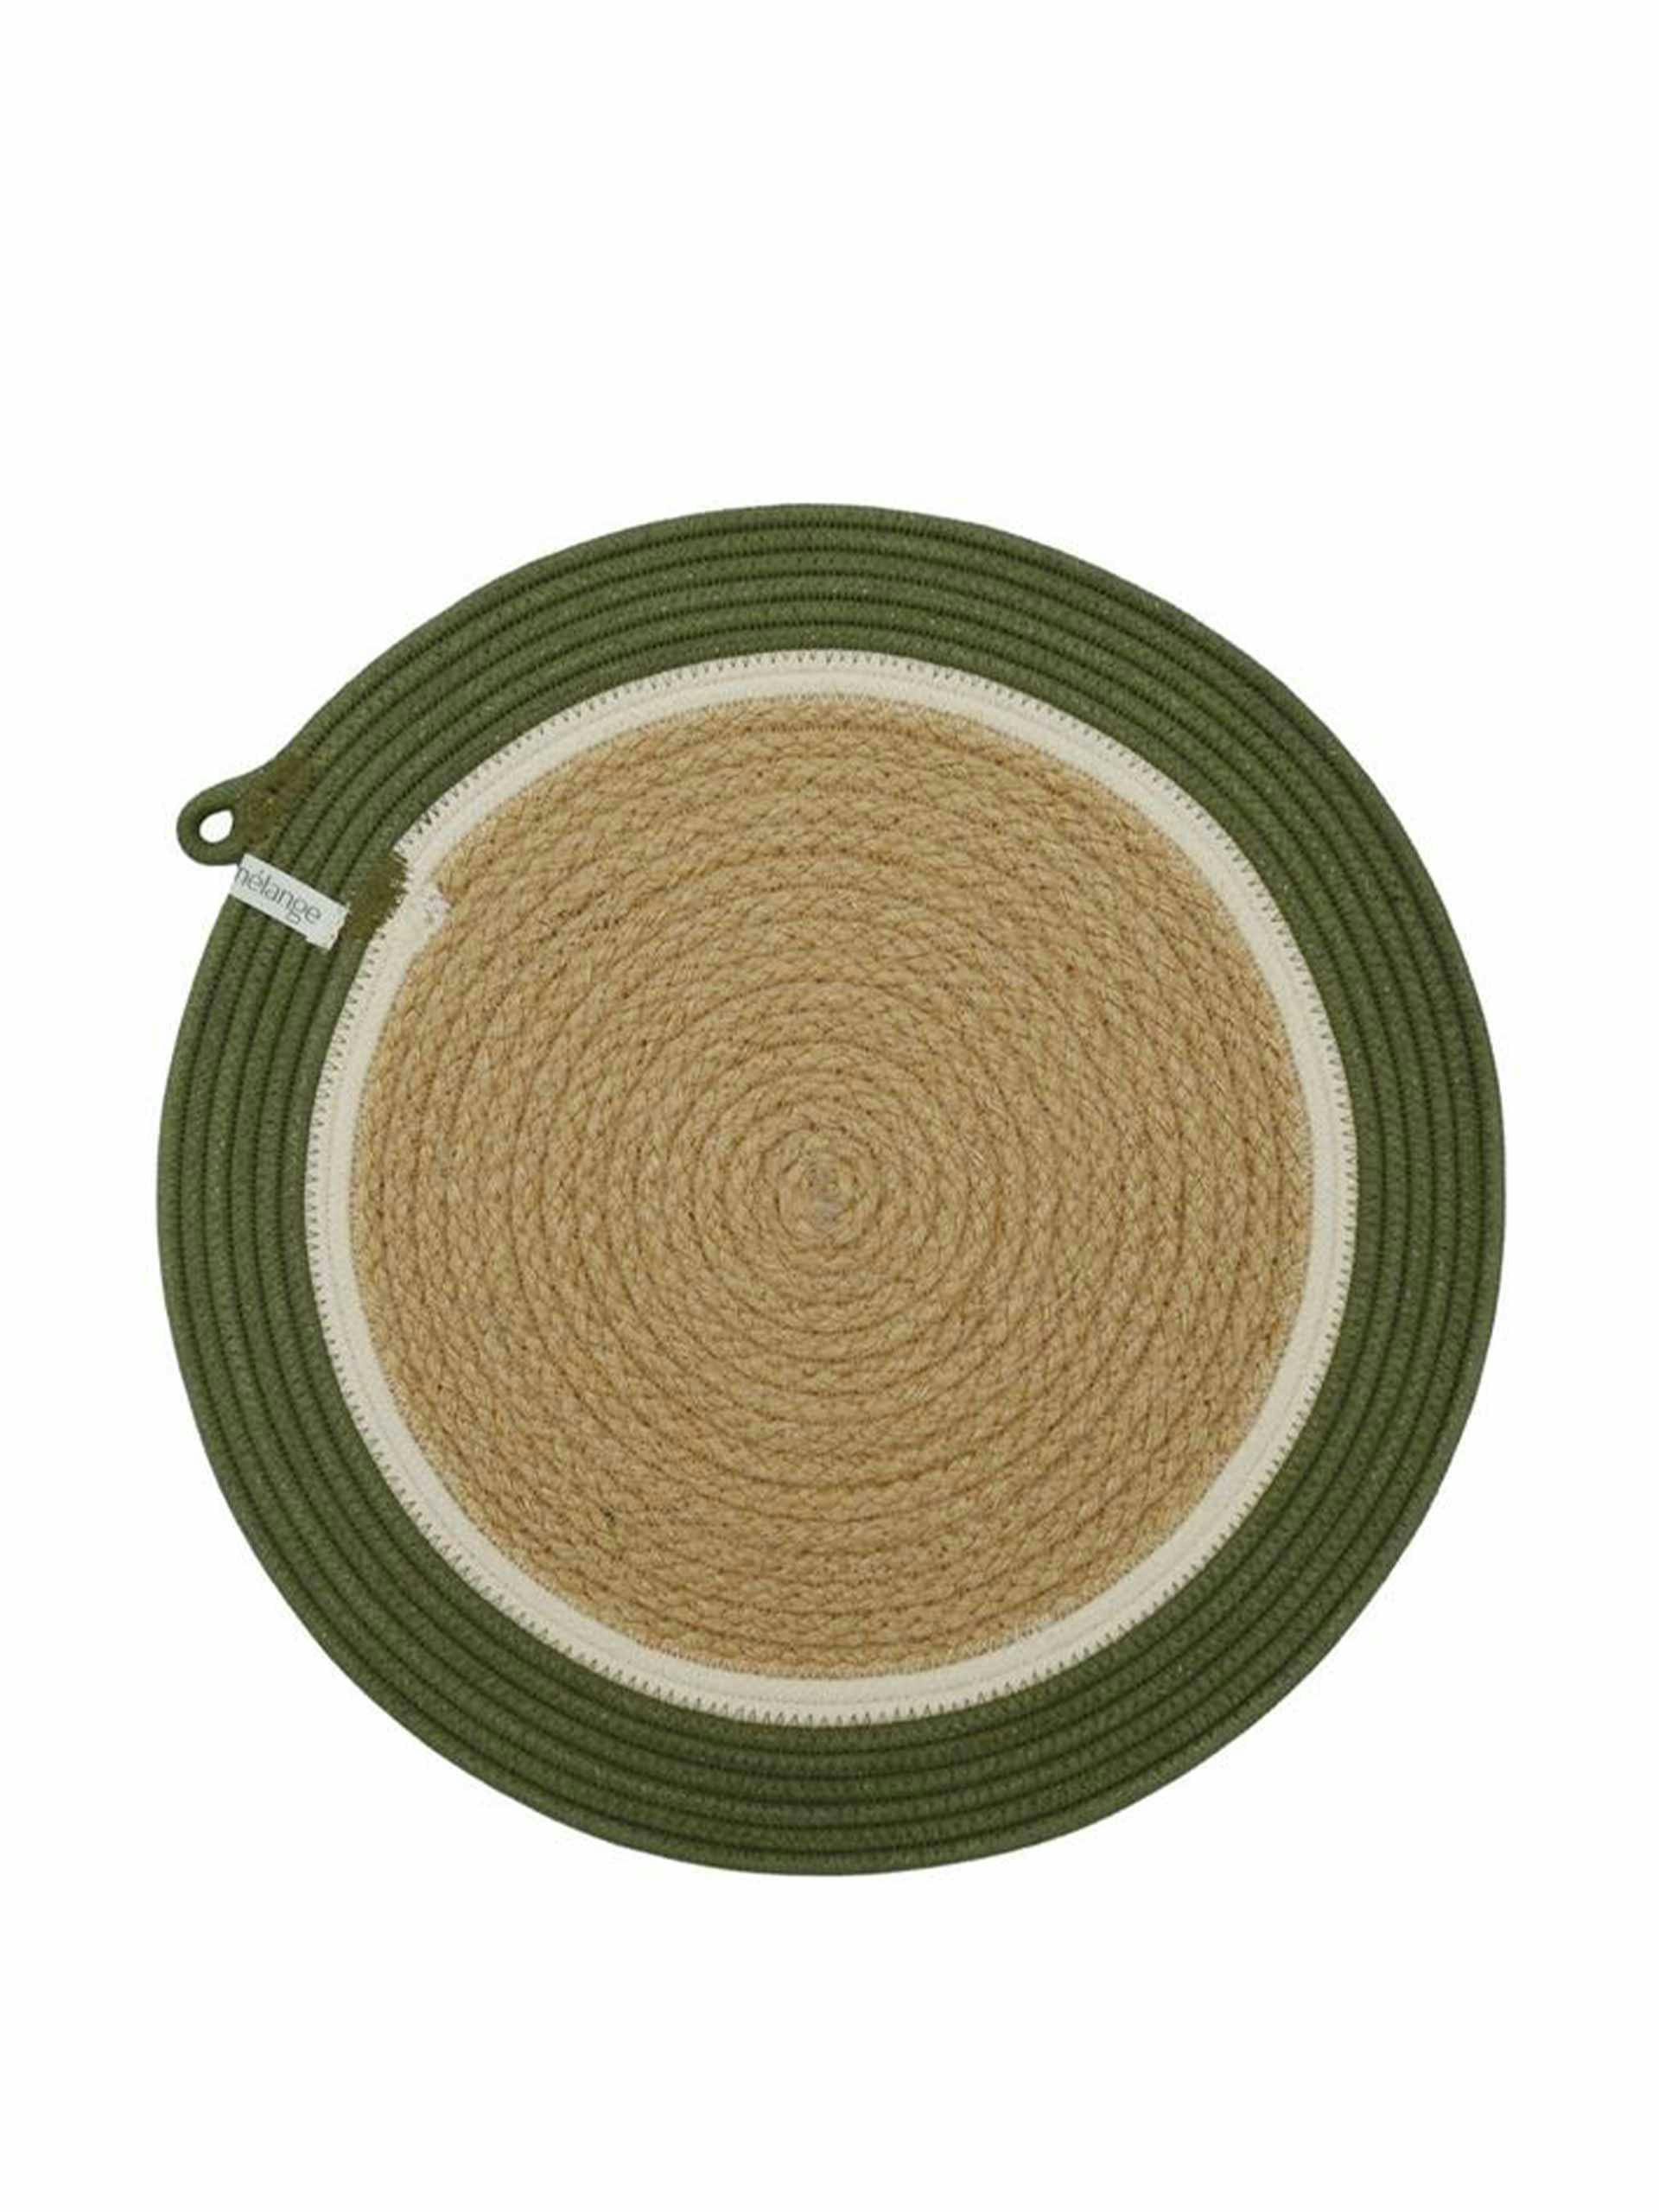 Jute placemat with olive green border